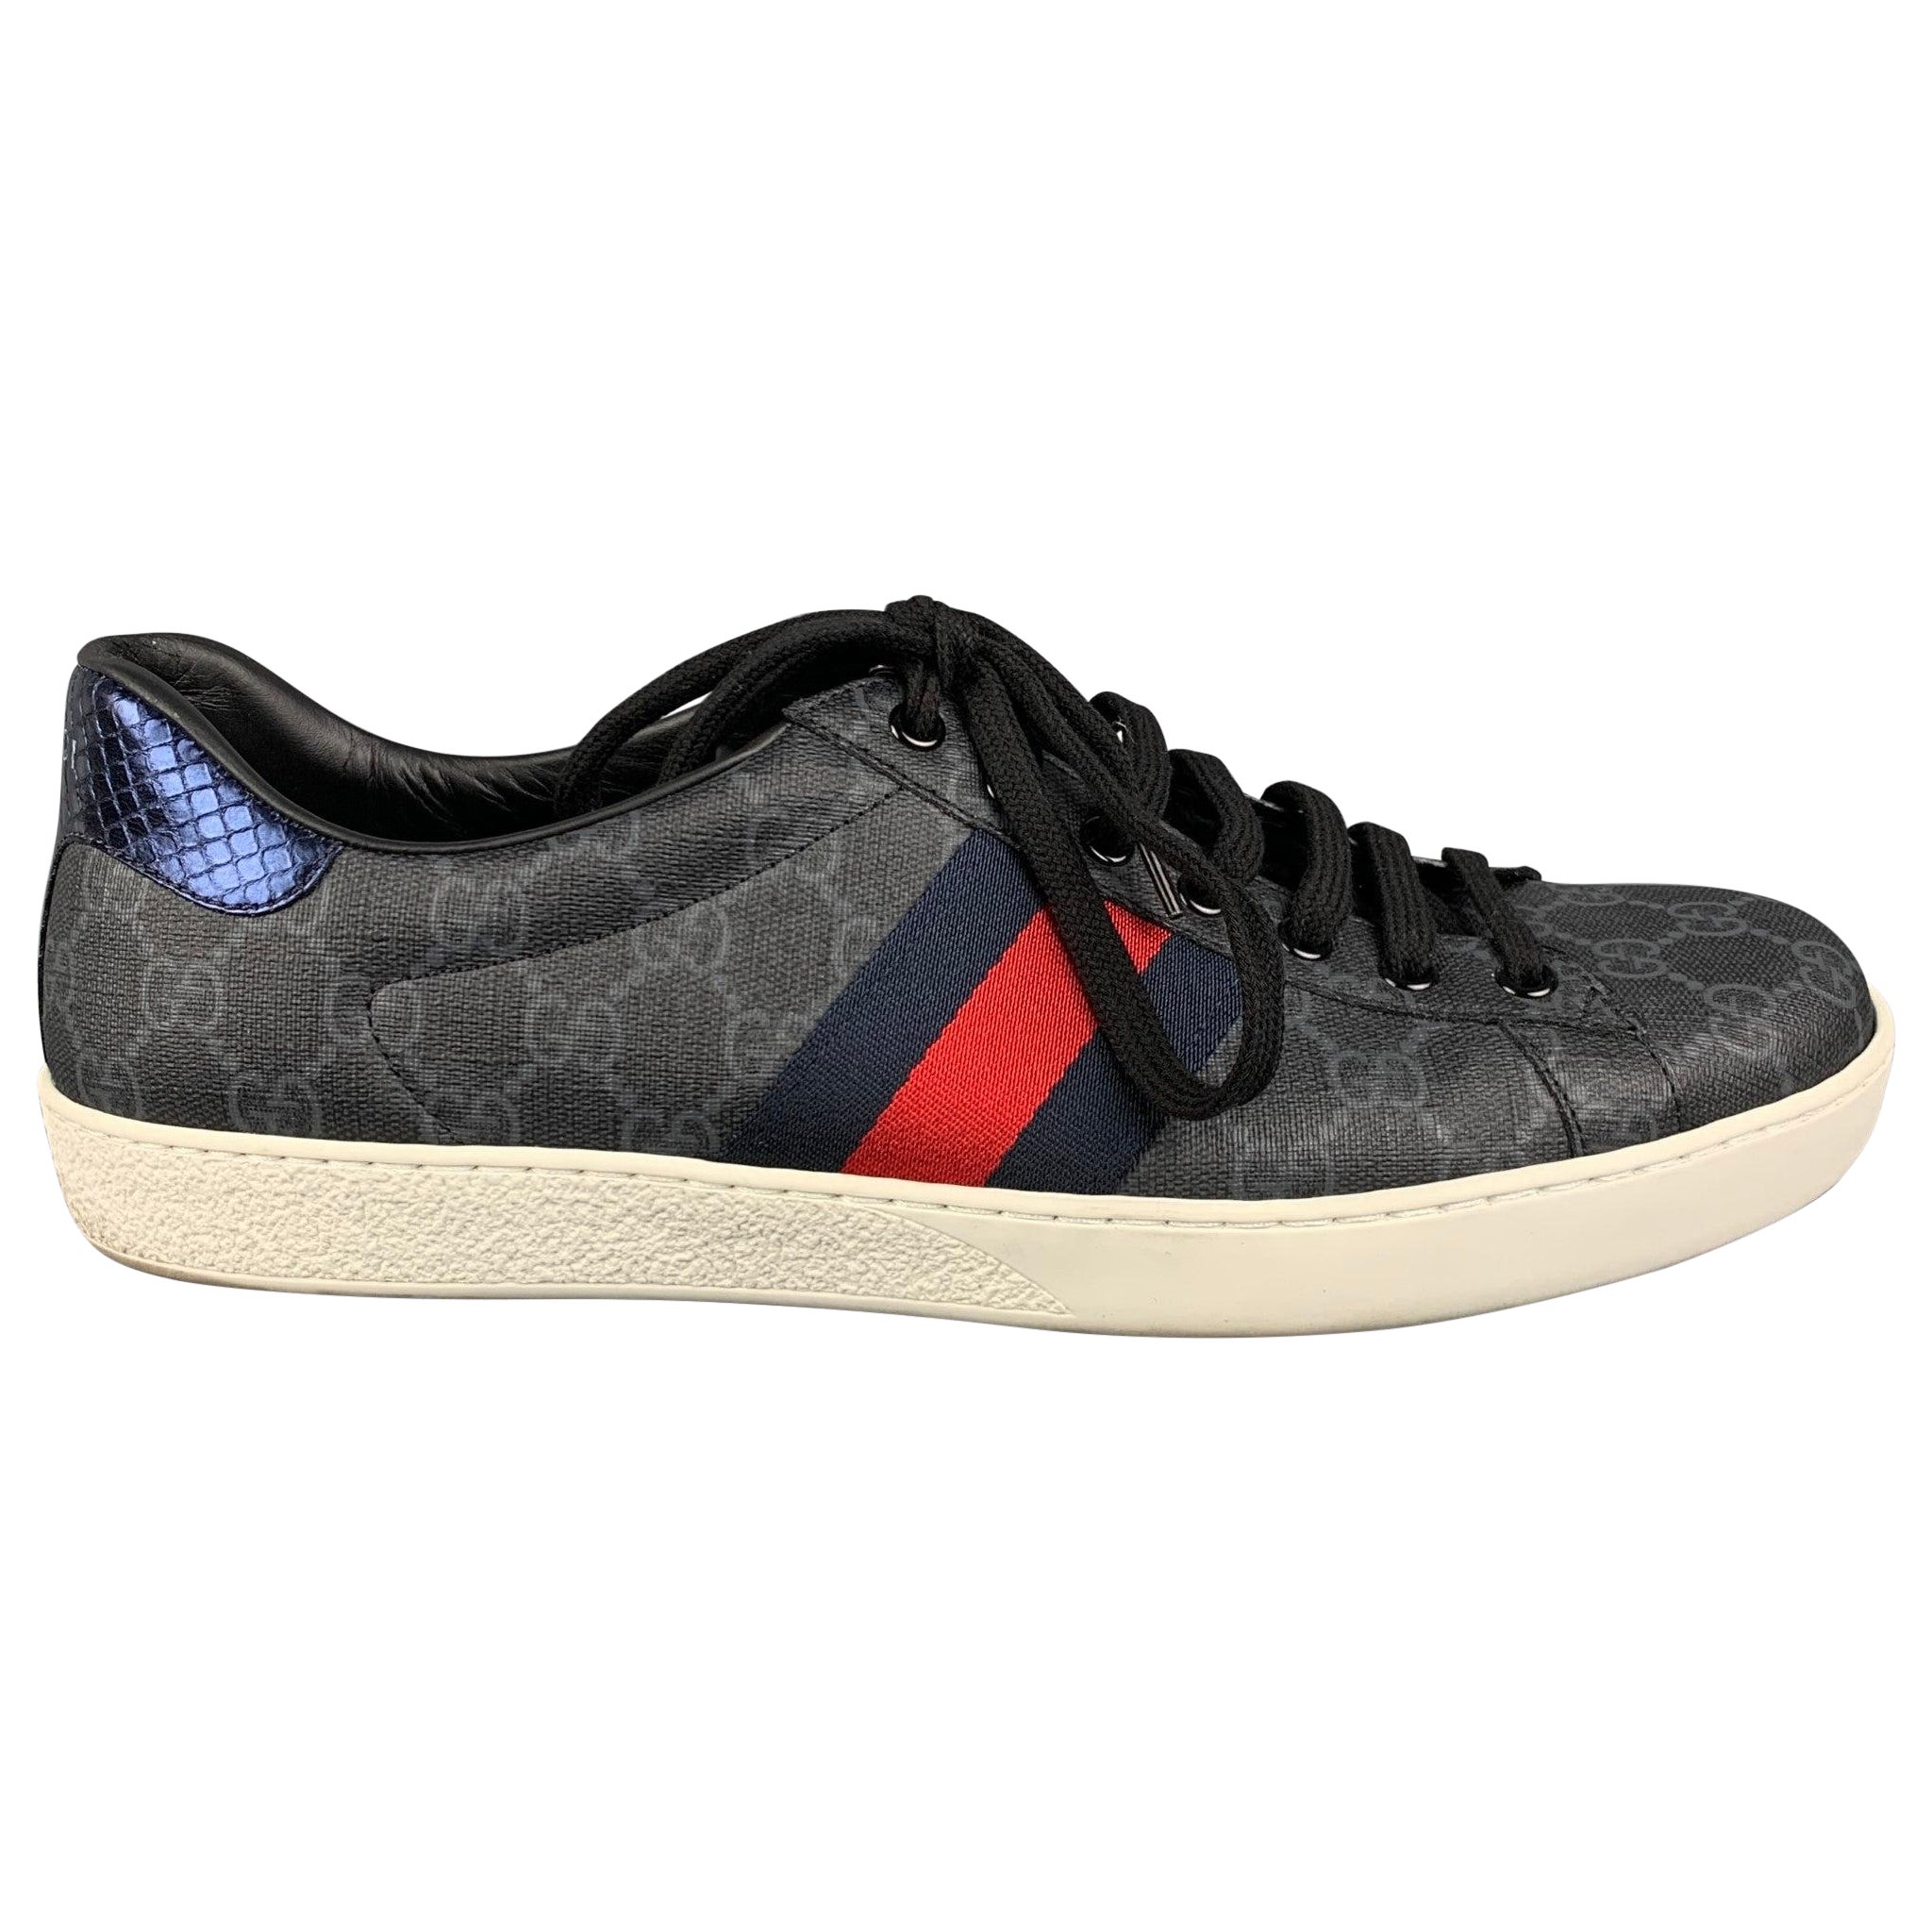 GUCCI Size 11 Black Grey Monogram Leather Lace Up Sneakers For Sale